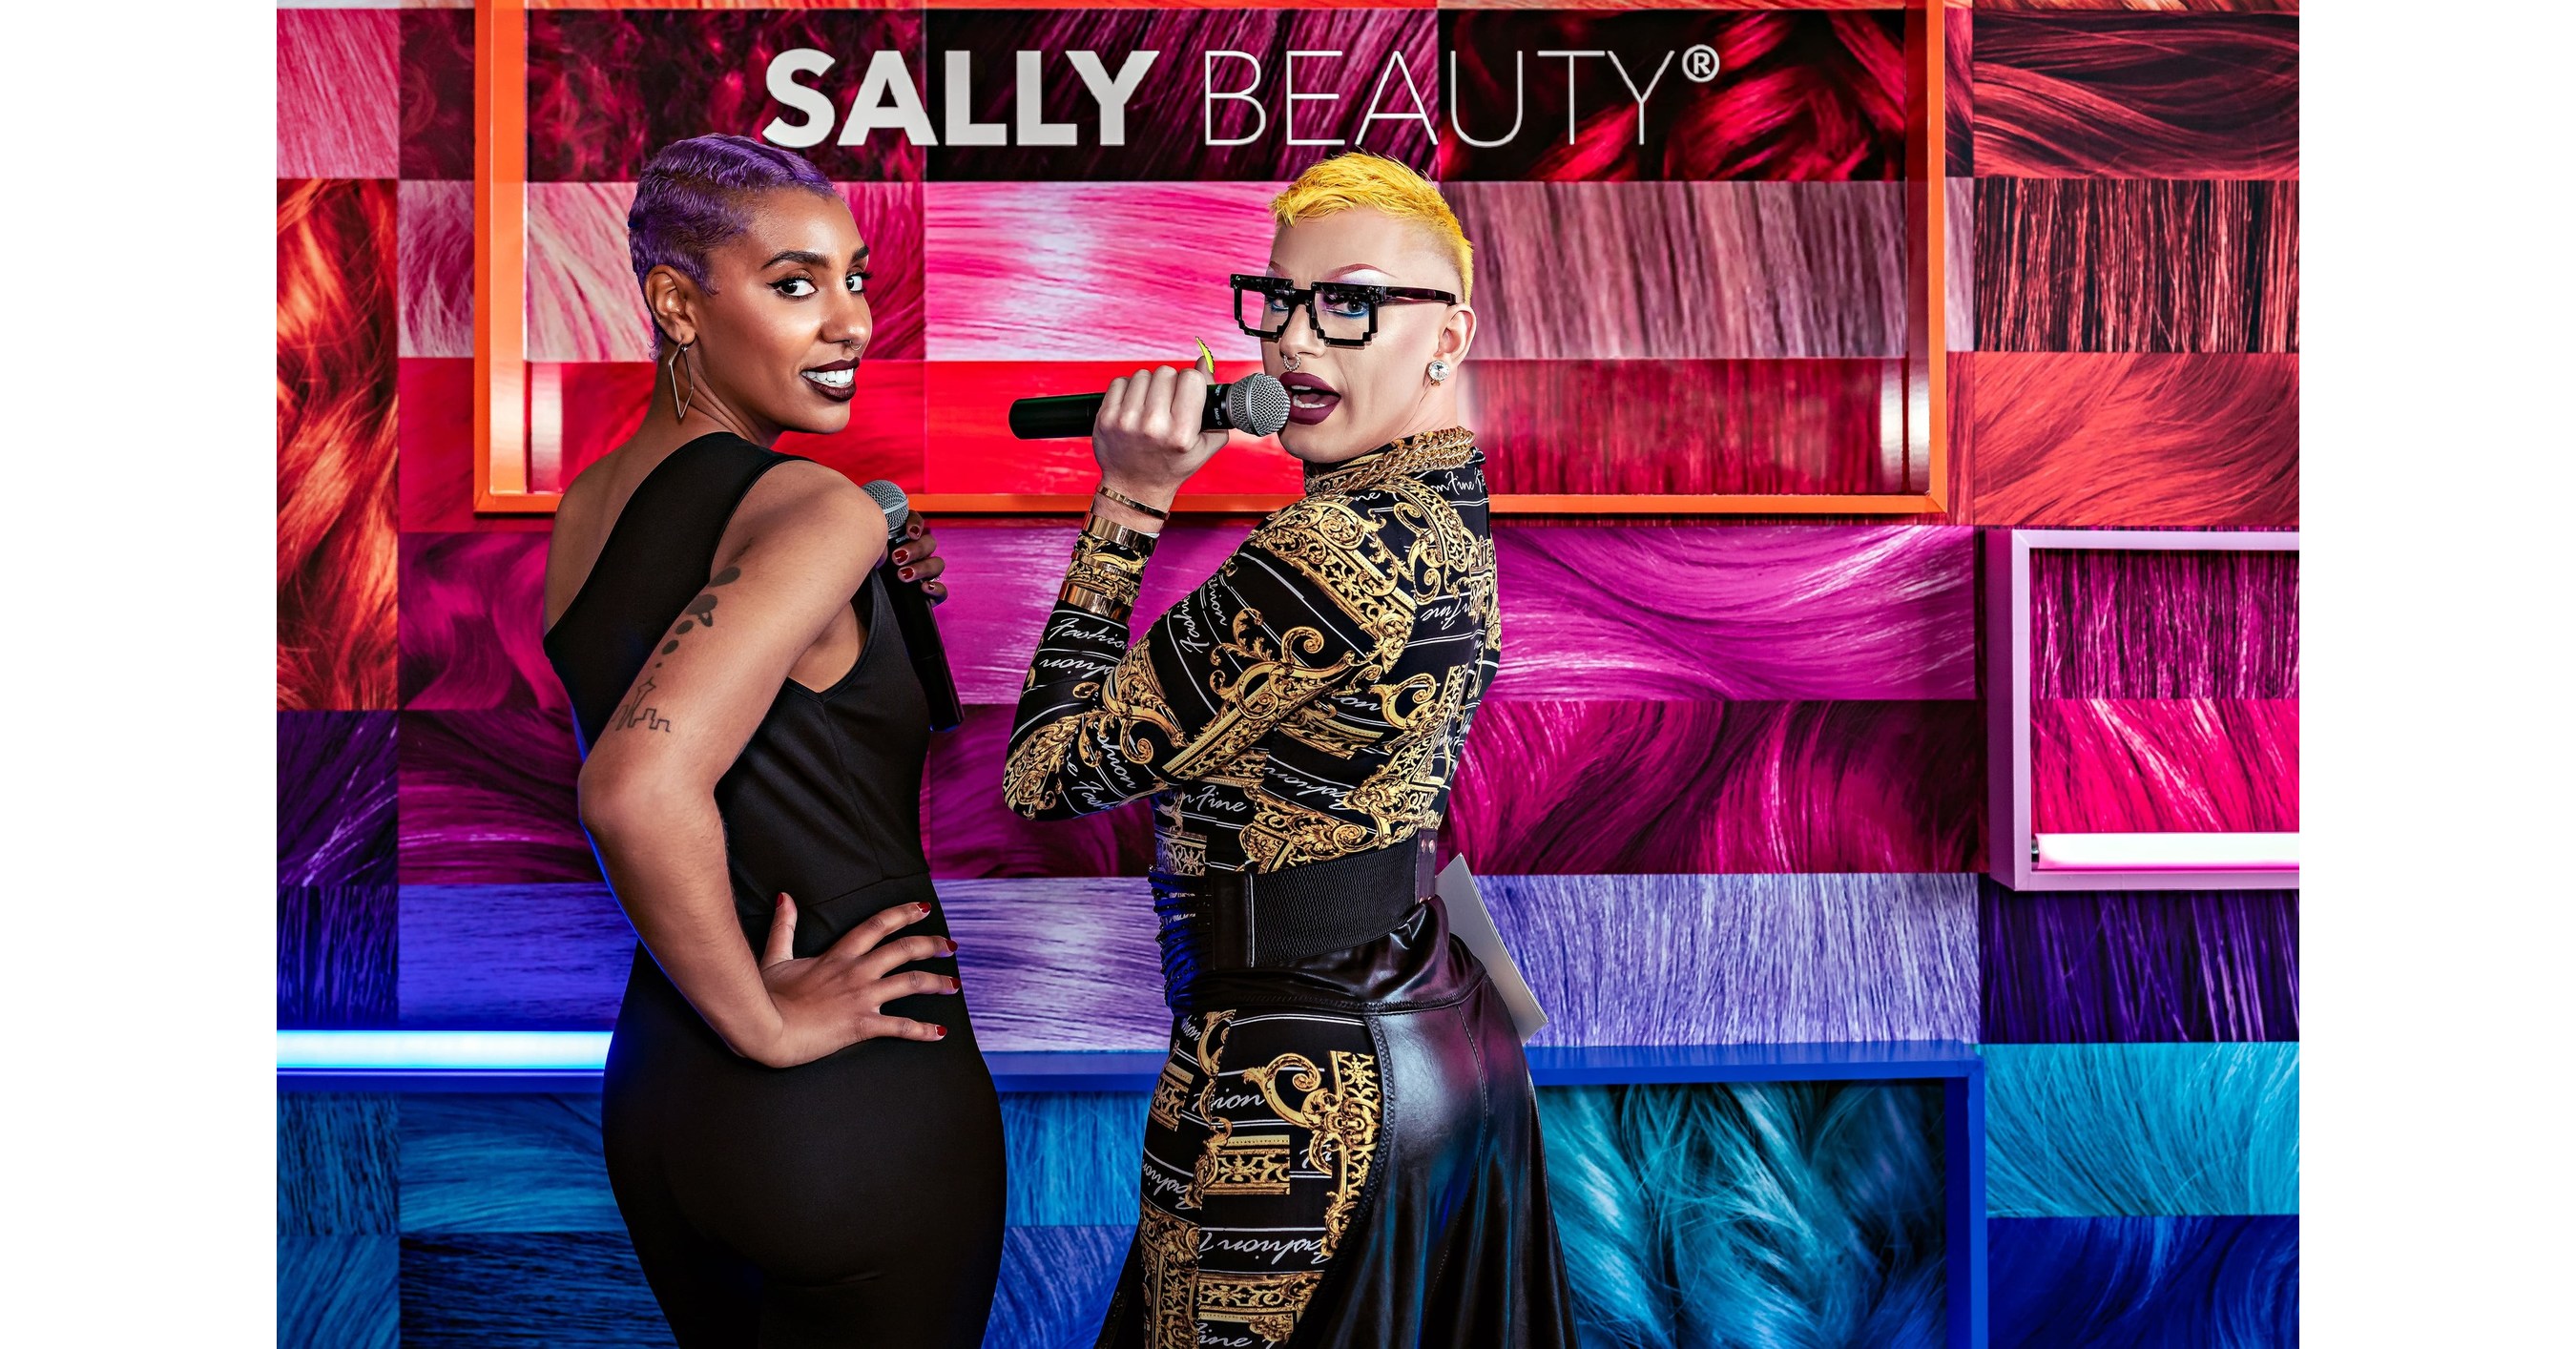 Sally Beauty Is On A Mission To Normalize Self-Expression with New Campaign: &quot;YOU by Sally&quot; featuring Musician &amp; TikTok Star Heather Chelan